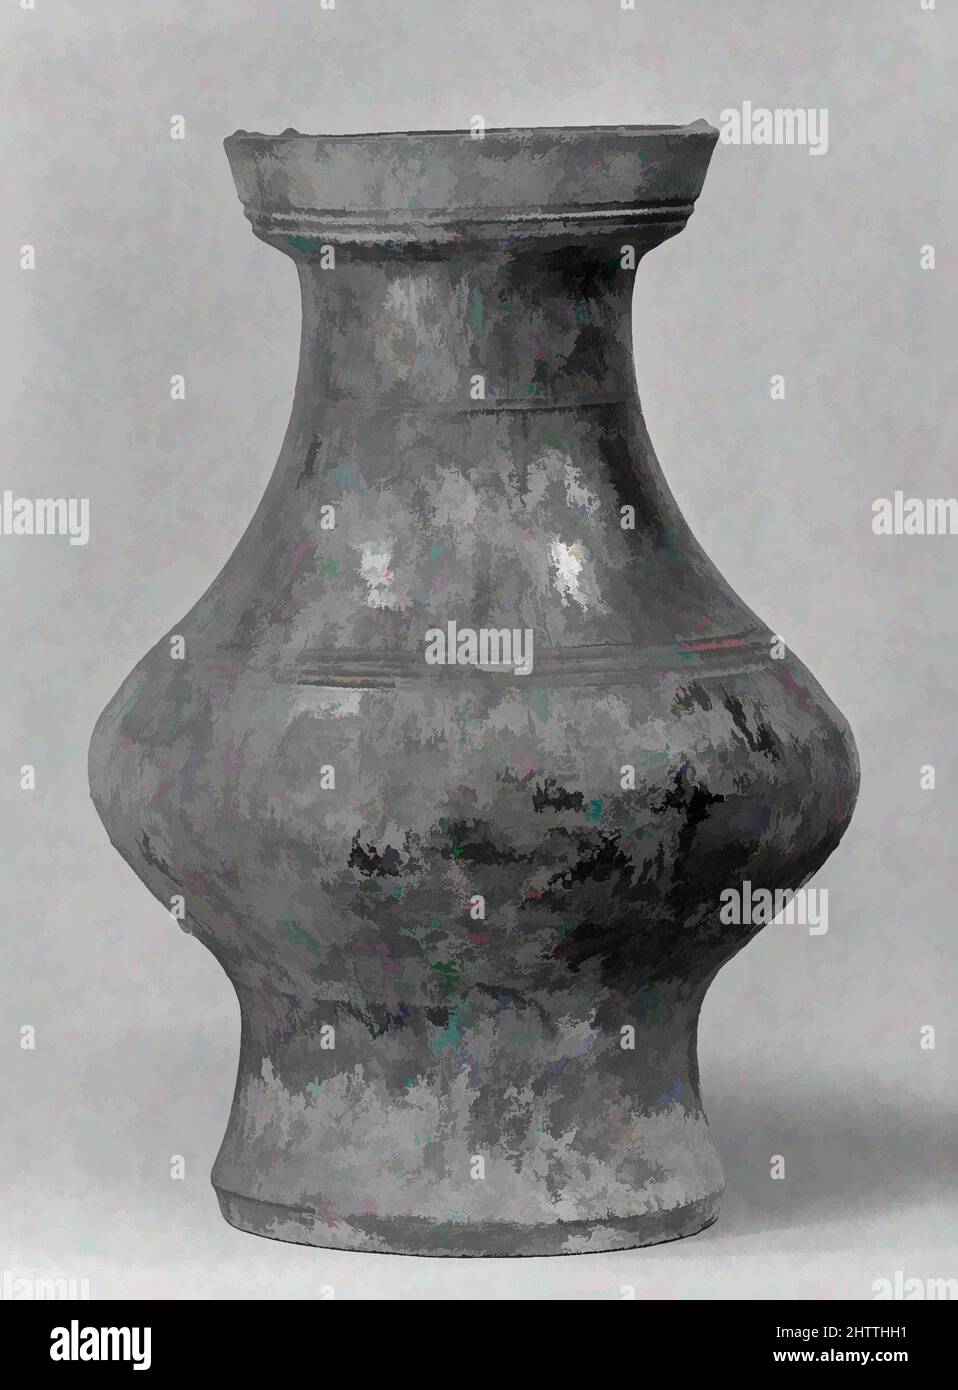 Art inspired by Vase, Han dynasty (206 B.C.–A.D. 220), China, Pottery, H. 17 1/4 in. (43.8 cm); Diam. of rim 7 3/4 in. (19.7 cm); Diam. 12 1/4 in. (31.1 cm); Diam. of base 8 in. (20.3 cm), Ceramics, Classic works modernized by Artotop with a splash of modernity. Shapes, color and value, eye-catching visual impact on art. Emotions through freedom of artworks in a contemporary way. A timeless message pursuing a wildly creative new direction. Artists turning to the digital medium and creating the Artotop NFT Stock Photo